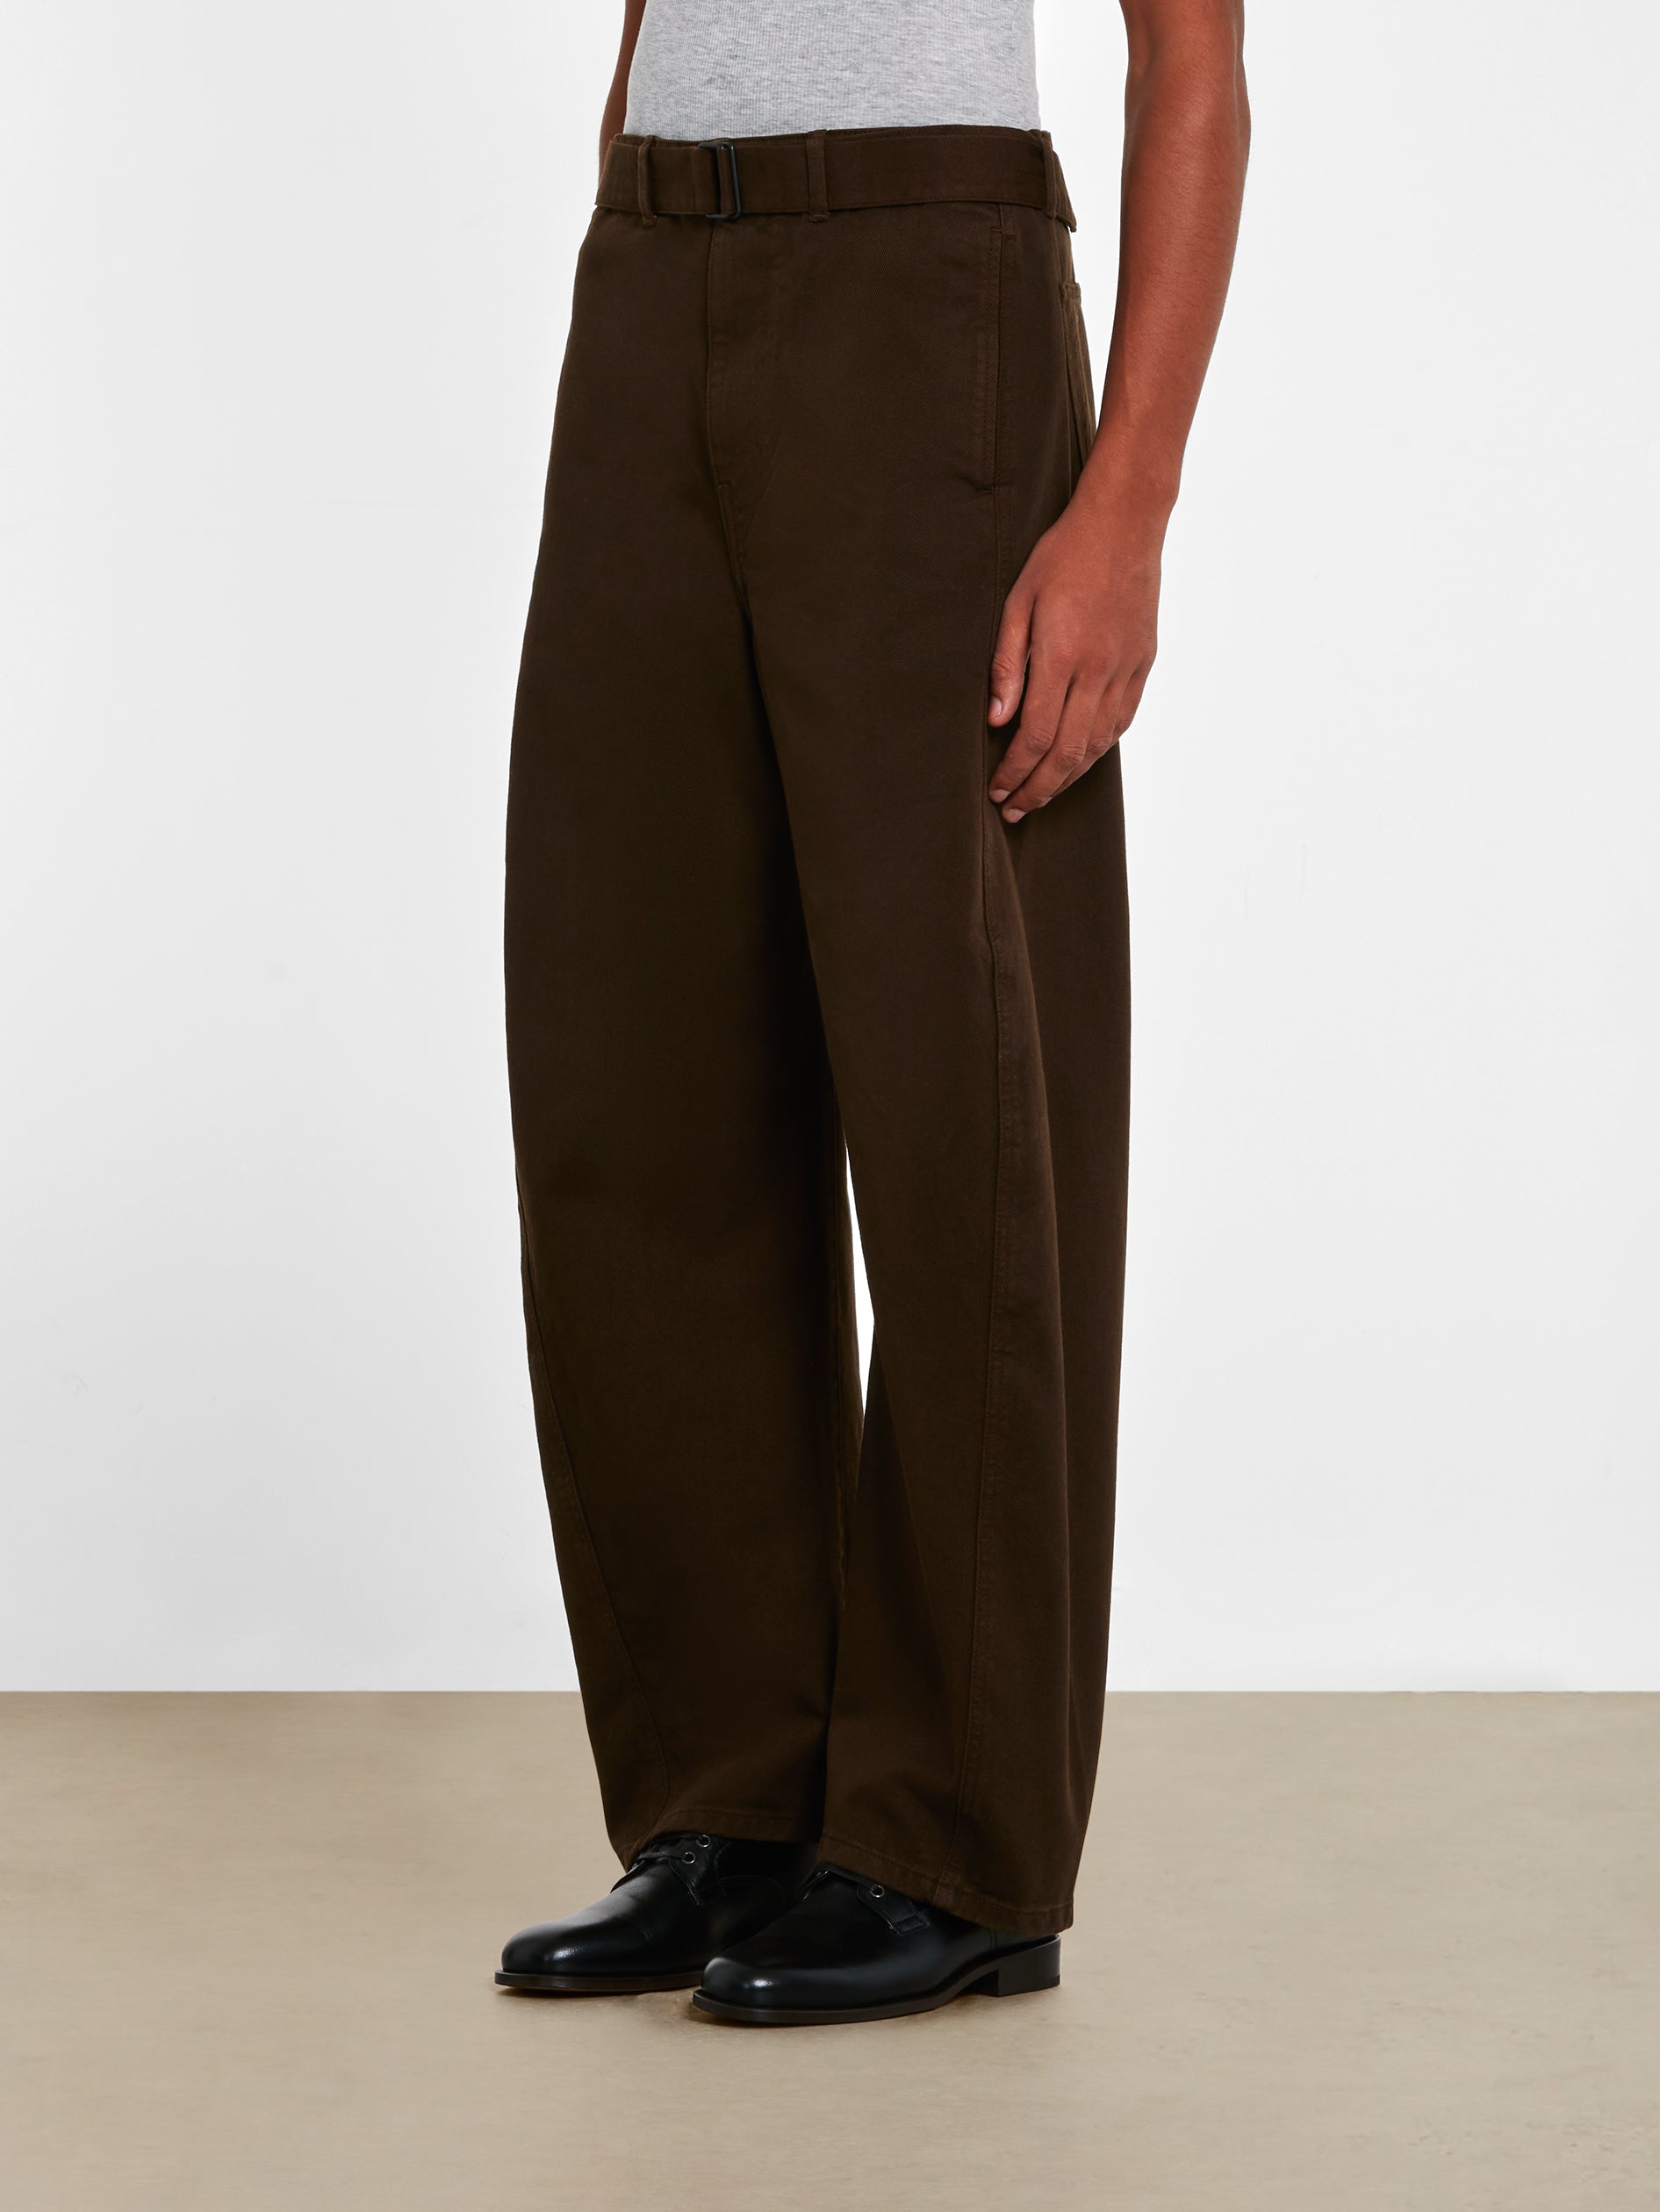 Lemaire - Men's Twisted Belted Pants - (Brown) – DSMNY E-SHOP